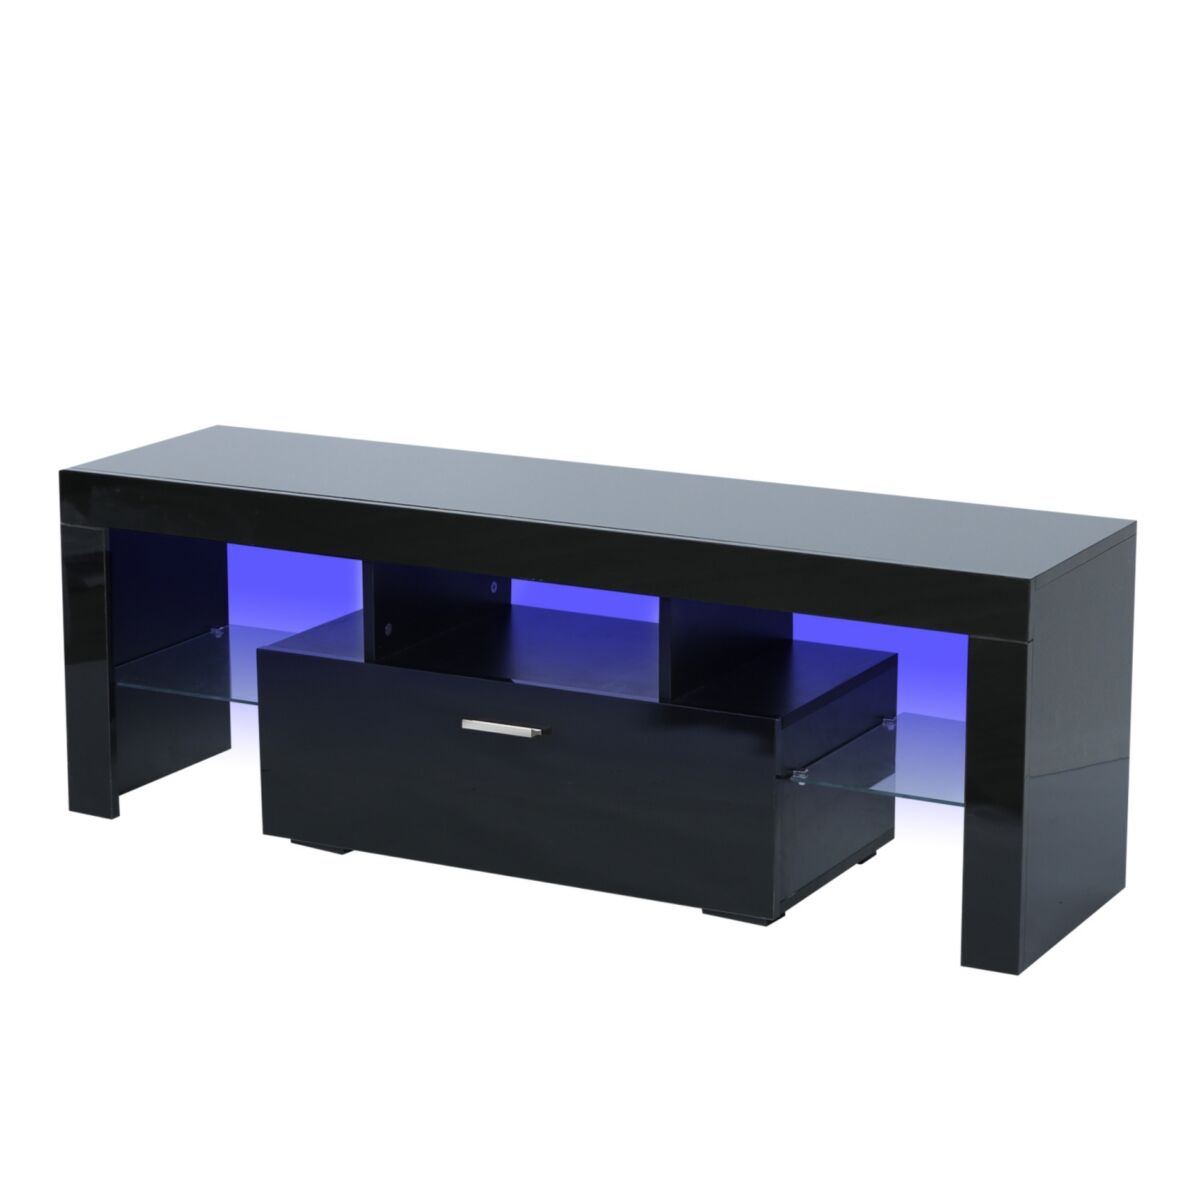 Simplie Fun Black Modern Tv Stand with Led Lights, high glossy front Tv Cabinet, can be assembled in Lounge Room, Living Room or Bedroom, color:Black